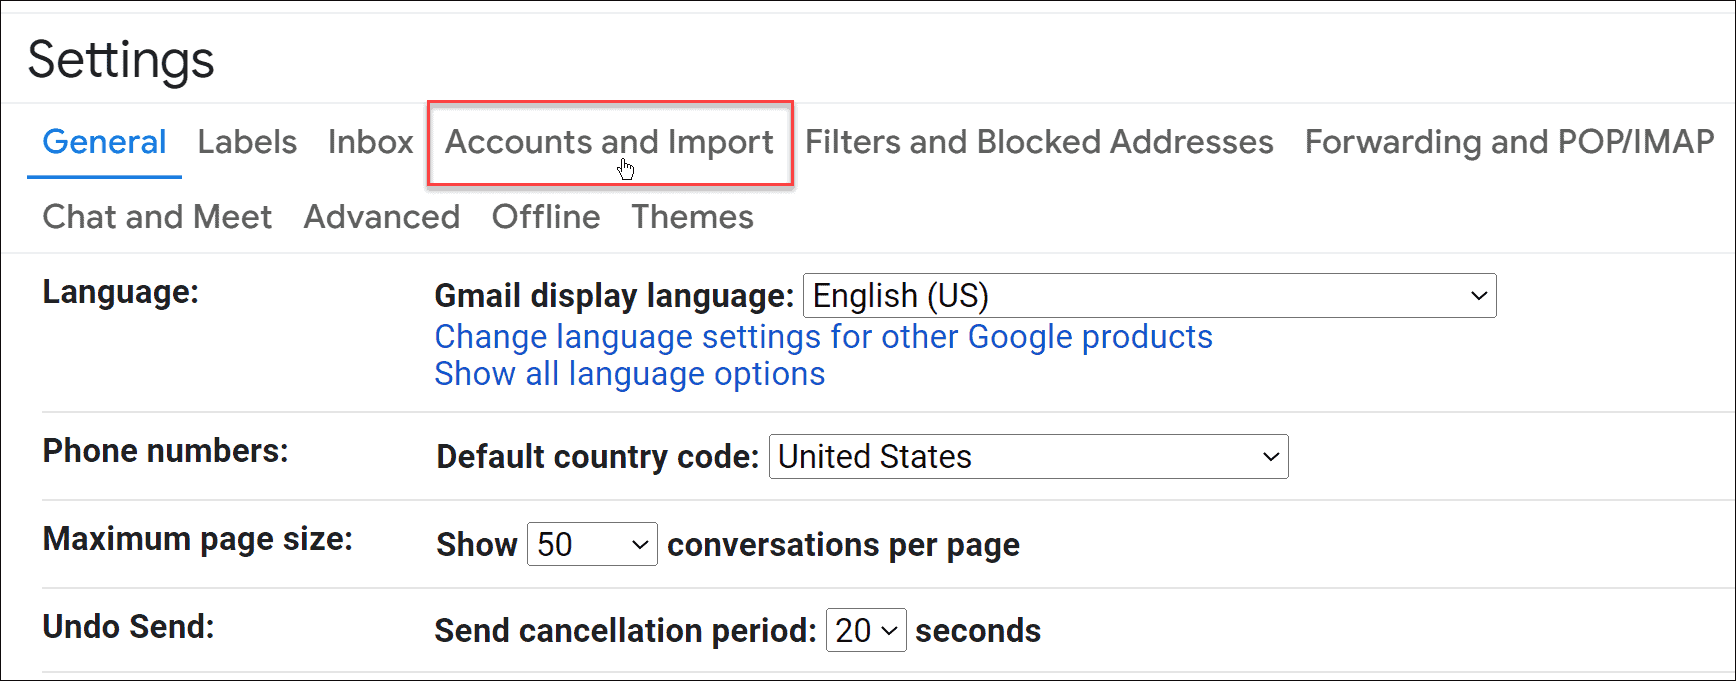 3-Accounts-and-Import